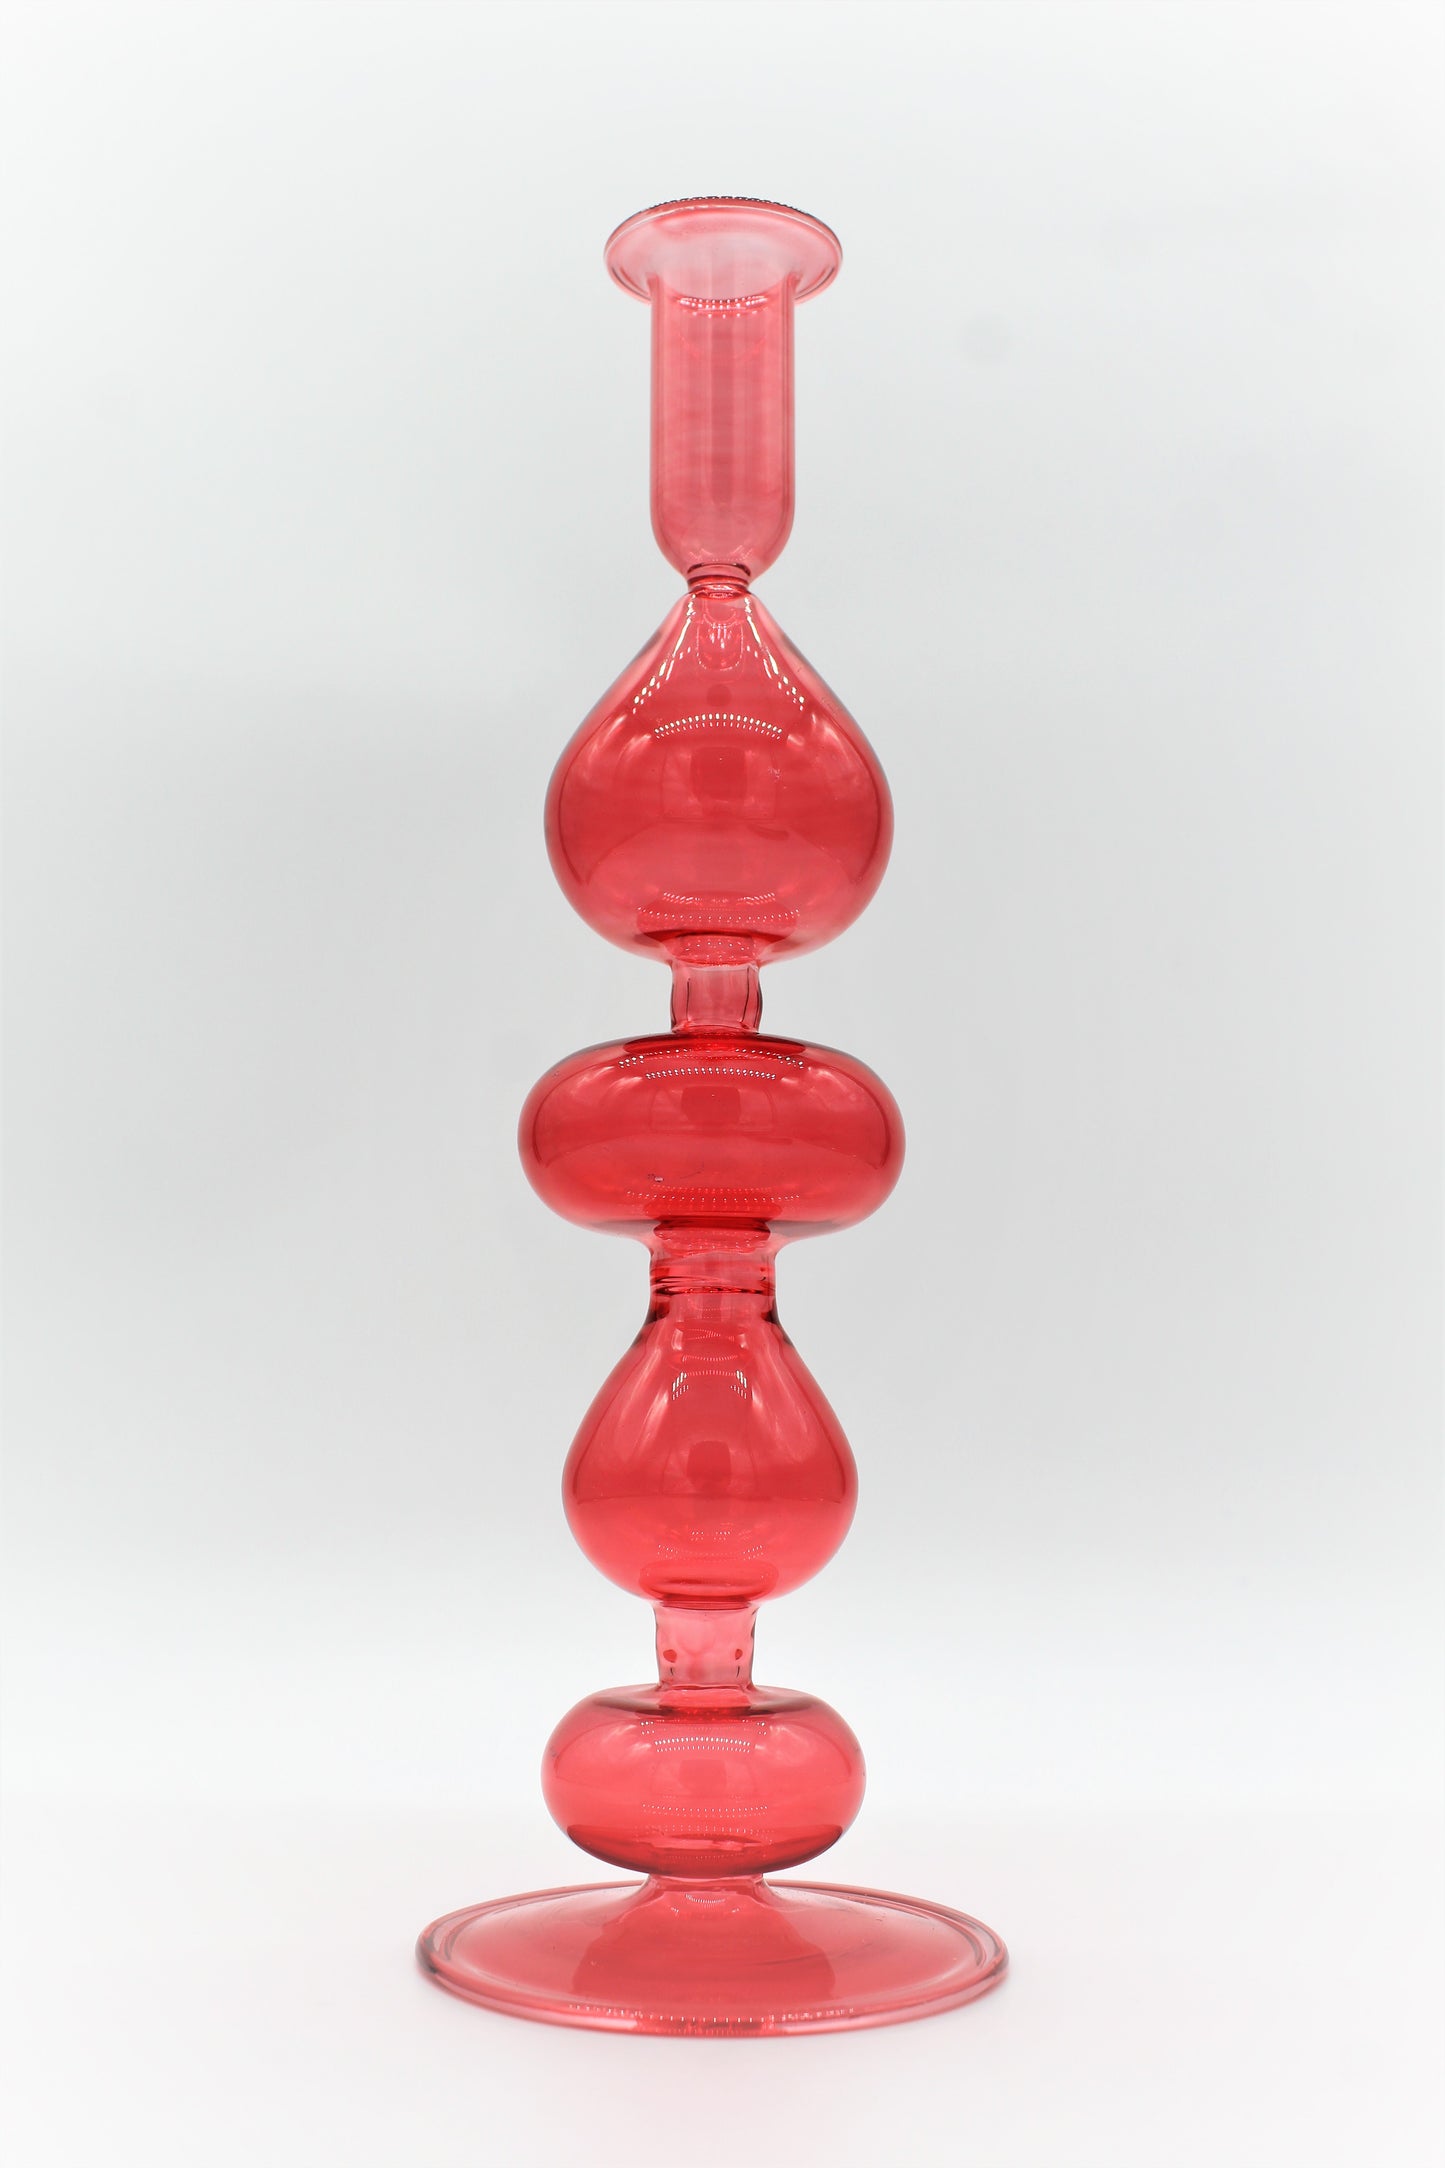 Tall Bubble Candle Holder